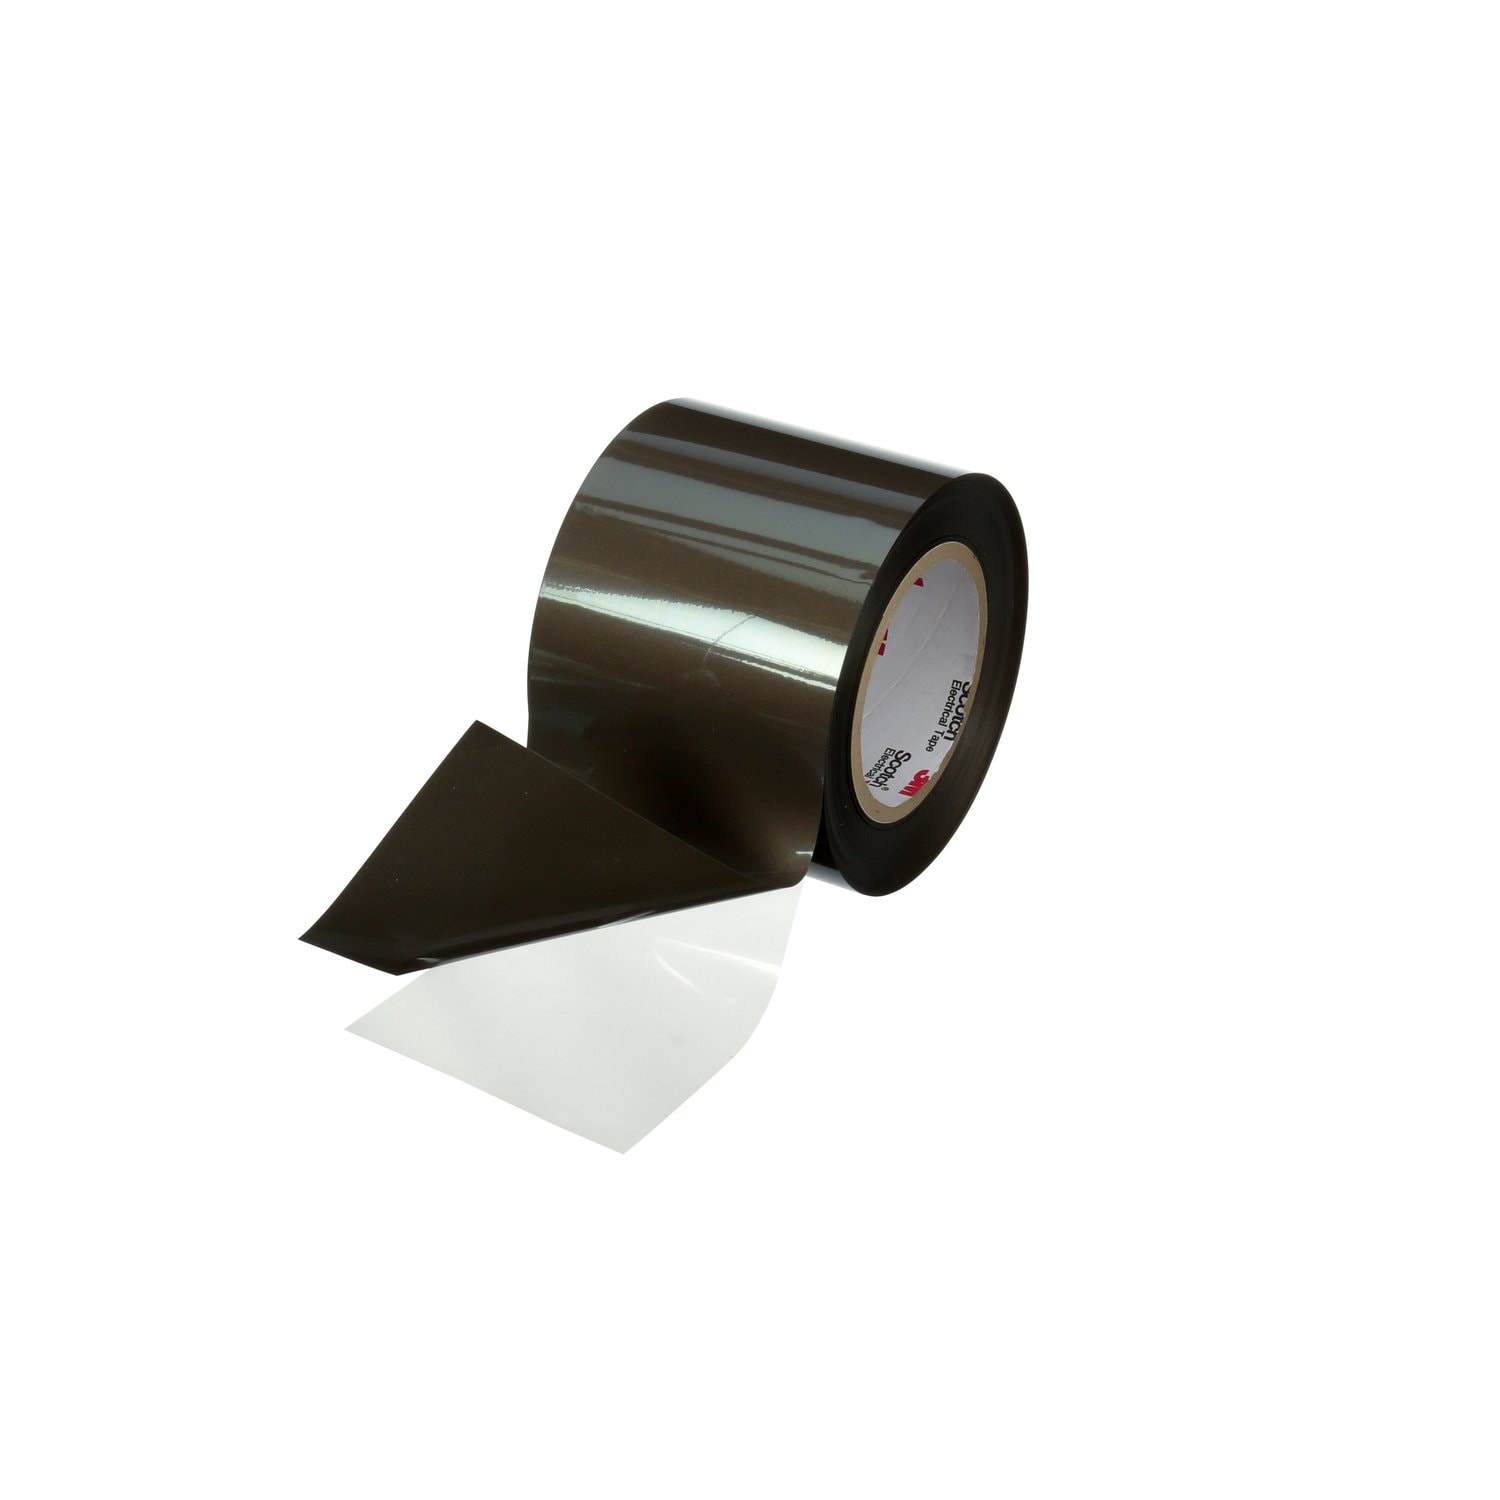 7100187613 - 3M Electrically Conductive Double-Sided Tape 9711S, 1060 mm x 100 m,
150um, 20 Rolls/Case